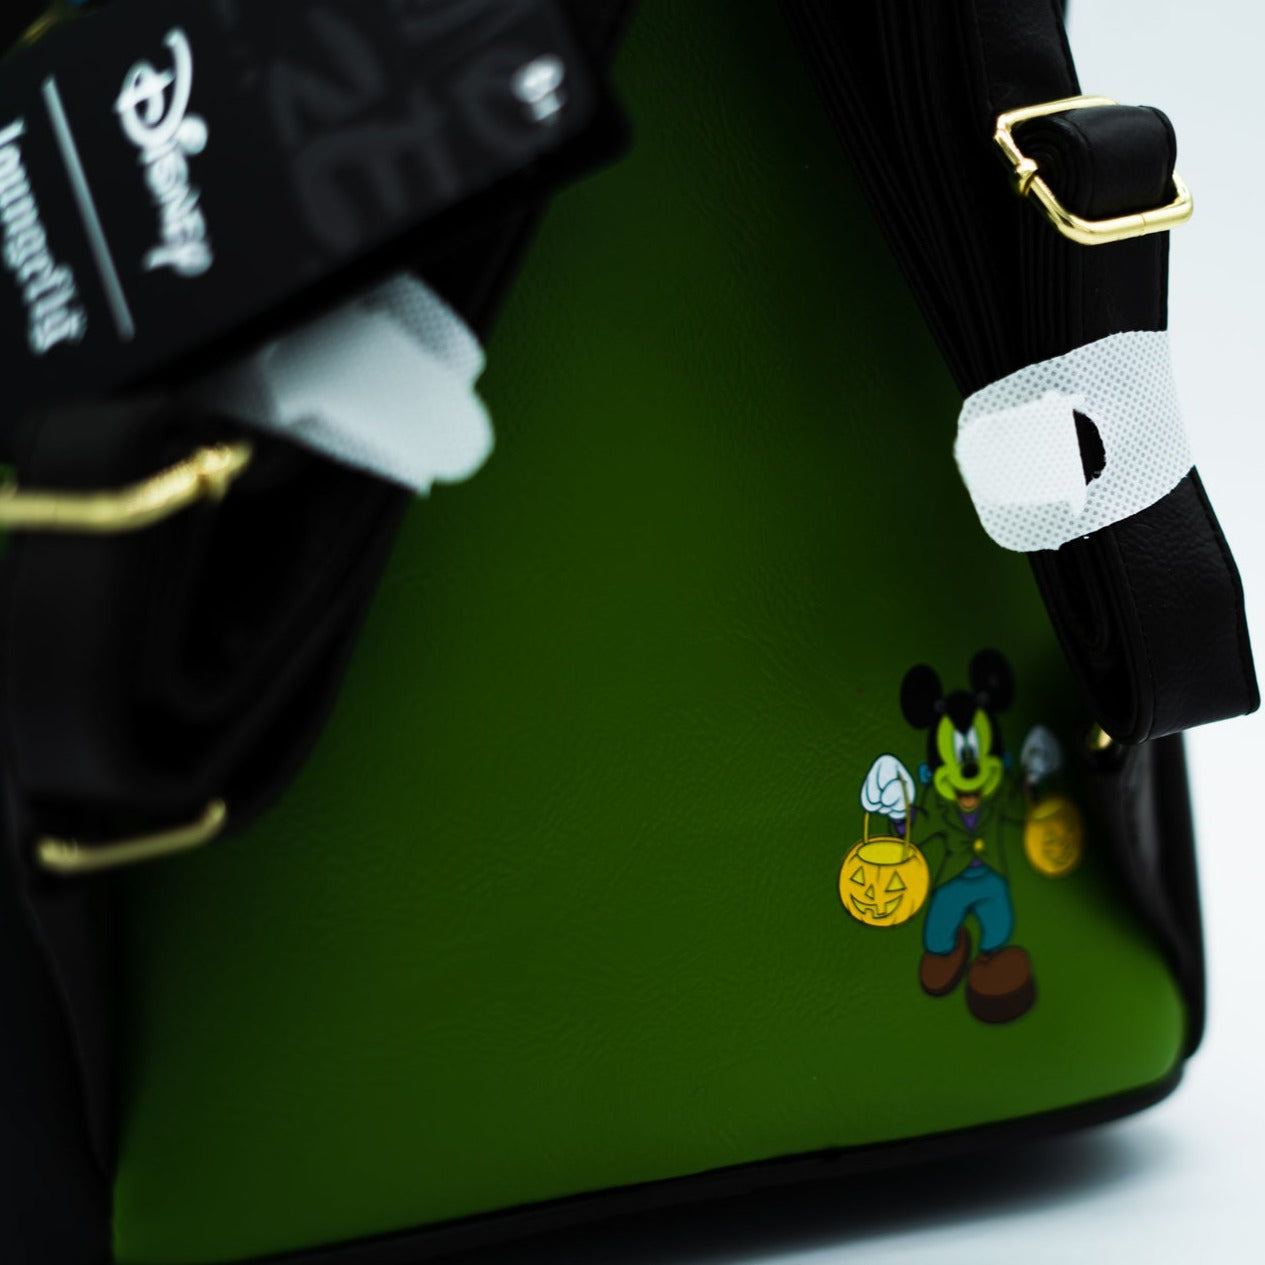 Loungefly Disney Mickey Mouse Frankenstein Mini Backpack - Entertainment Earth Exclusive